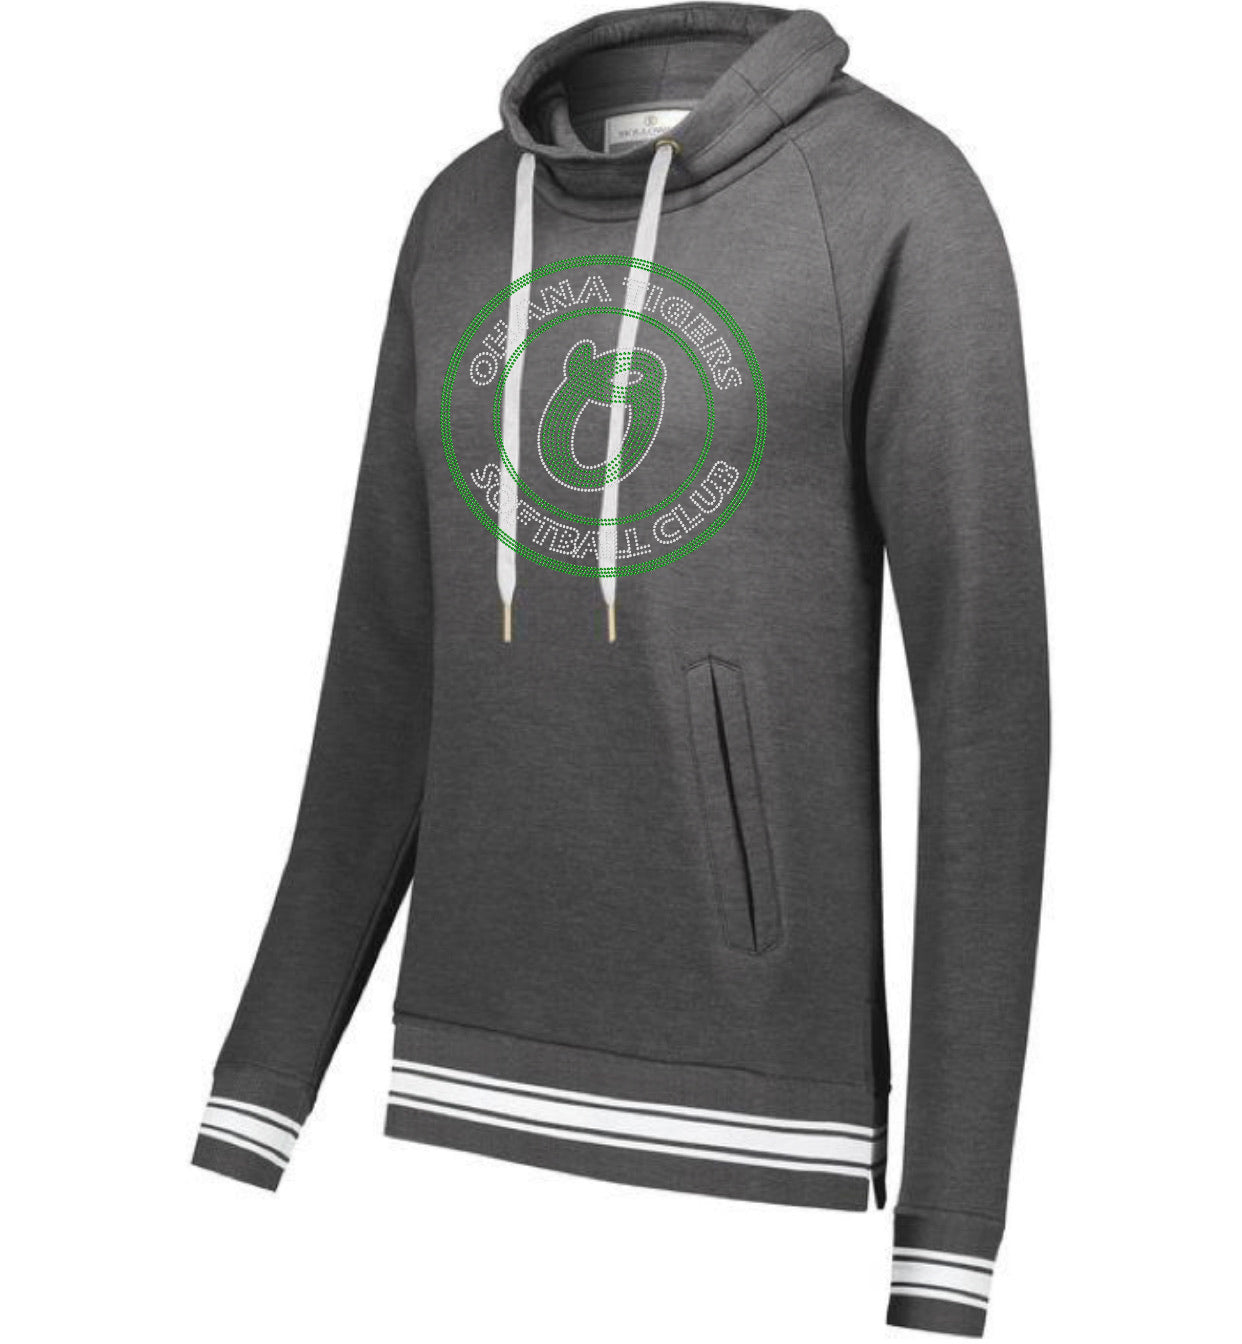 Copy of LADIES IVY LEAGUE FUNNEL NECK PULLOVER